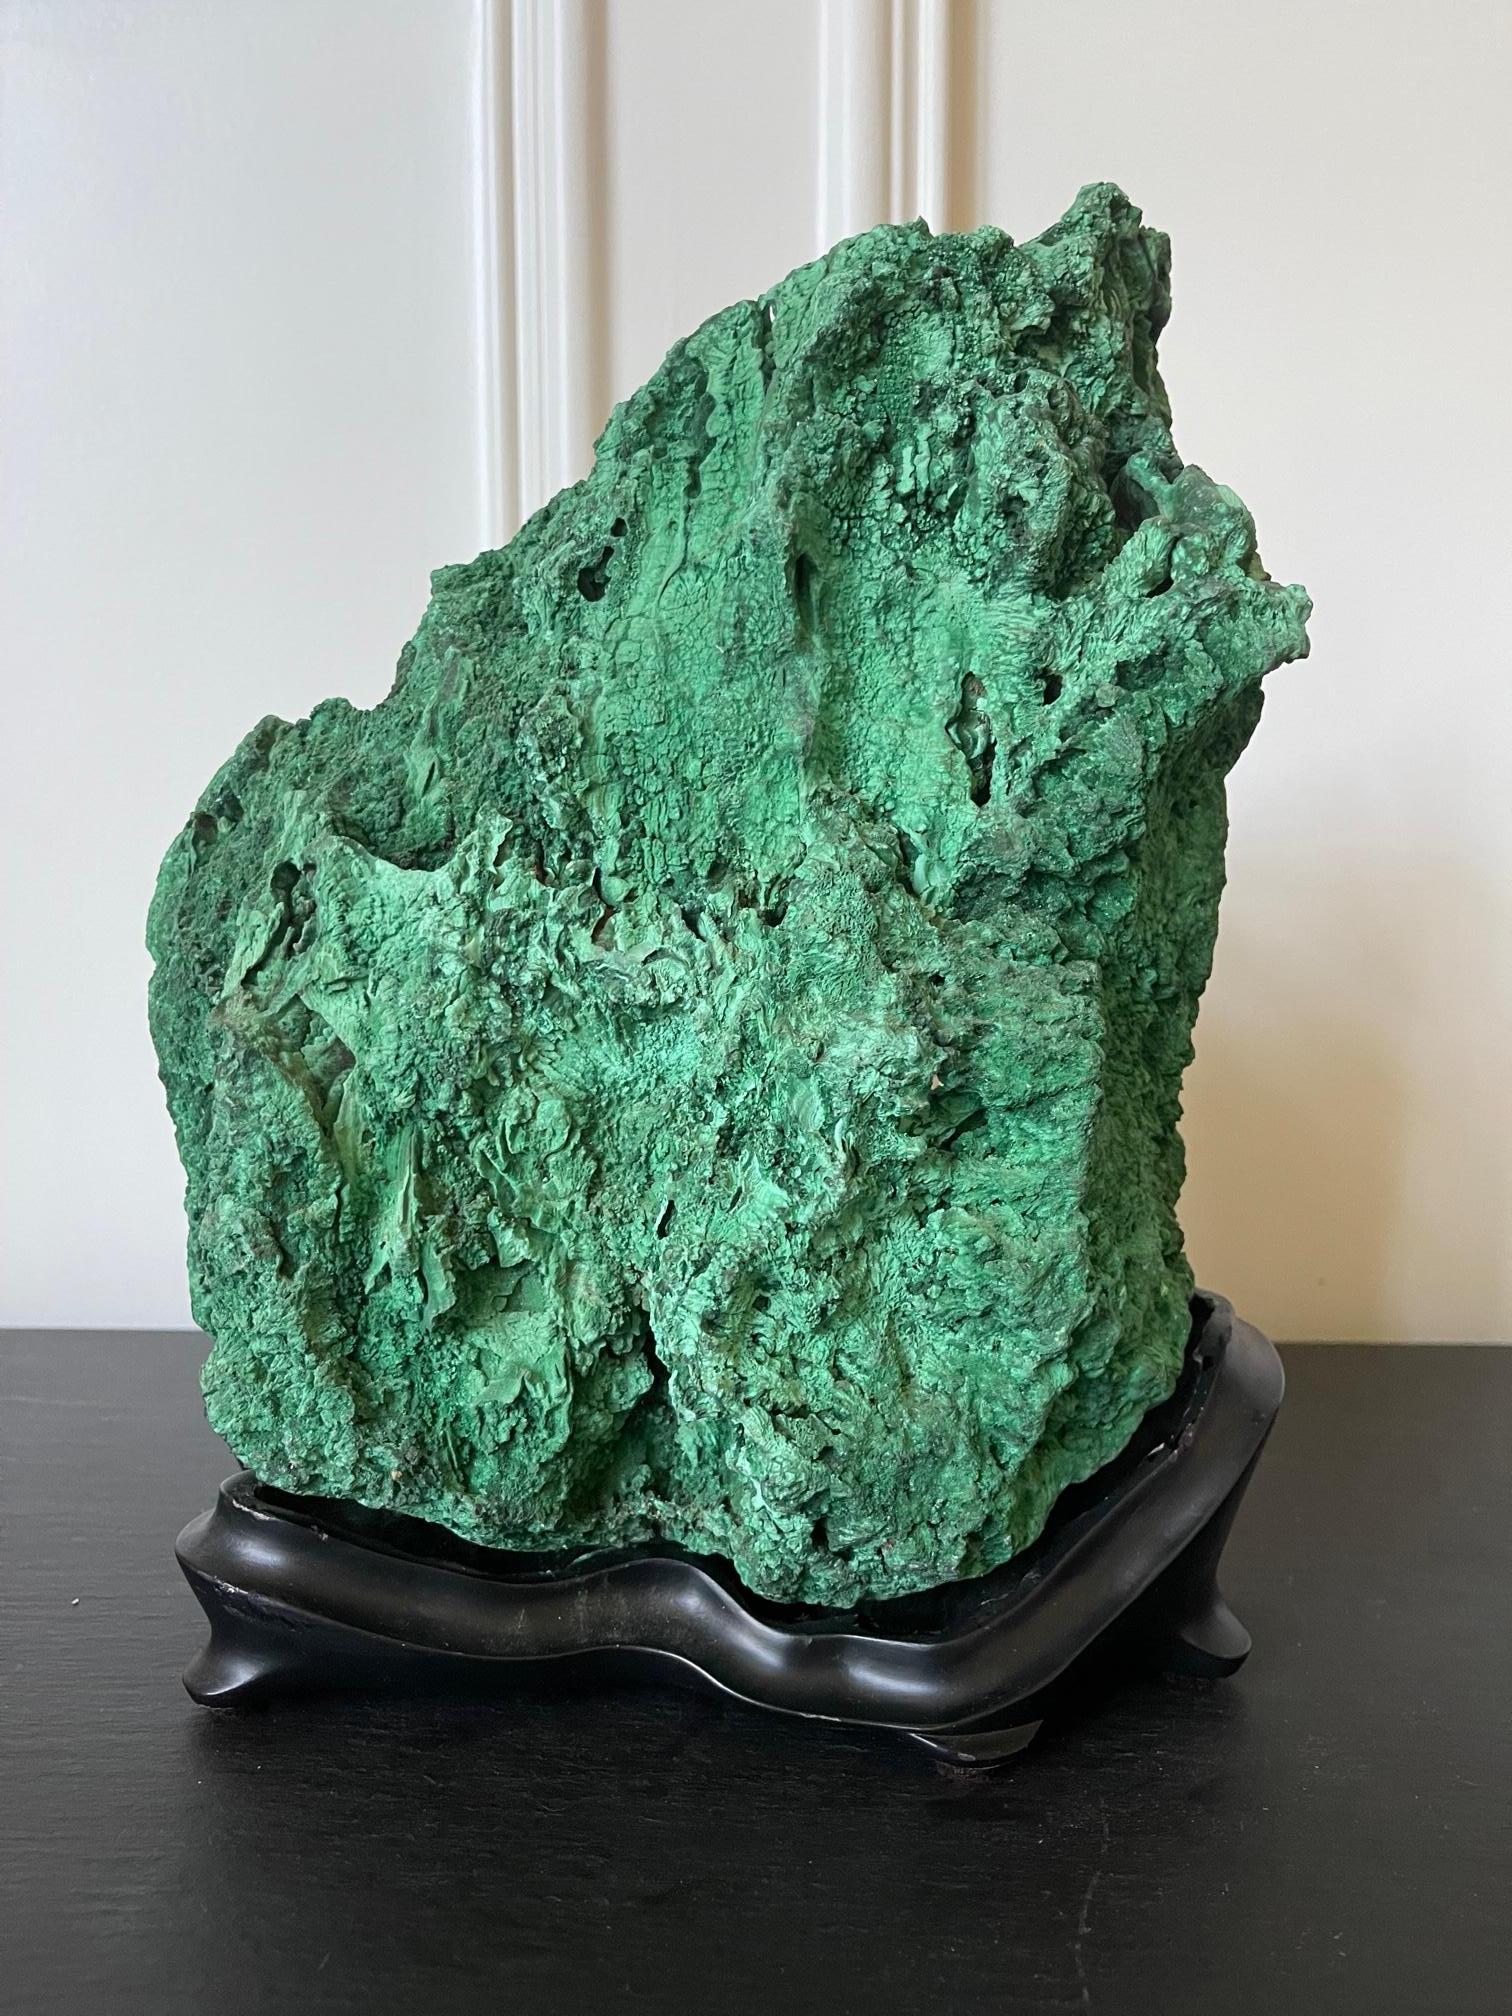 A natural malachite boulder on a fitted wood stand displayed as a Chinese scholar stone (Gong Shi), also known as meditation stone. The natural gem specimen displays a wonderful mountainous form with a peak off the center, organic and well balanced.